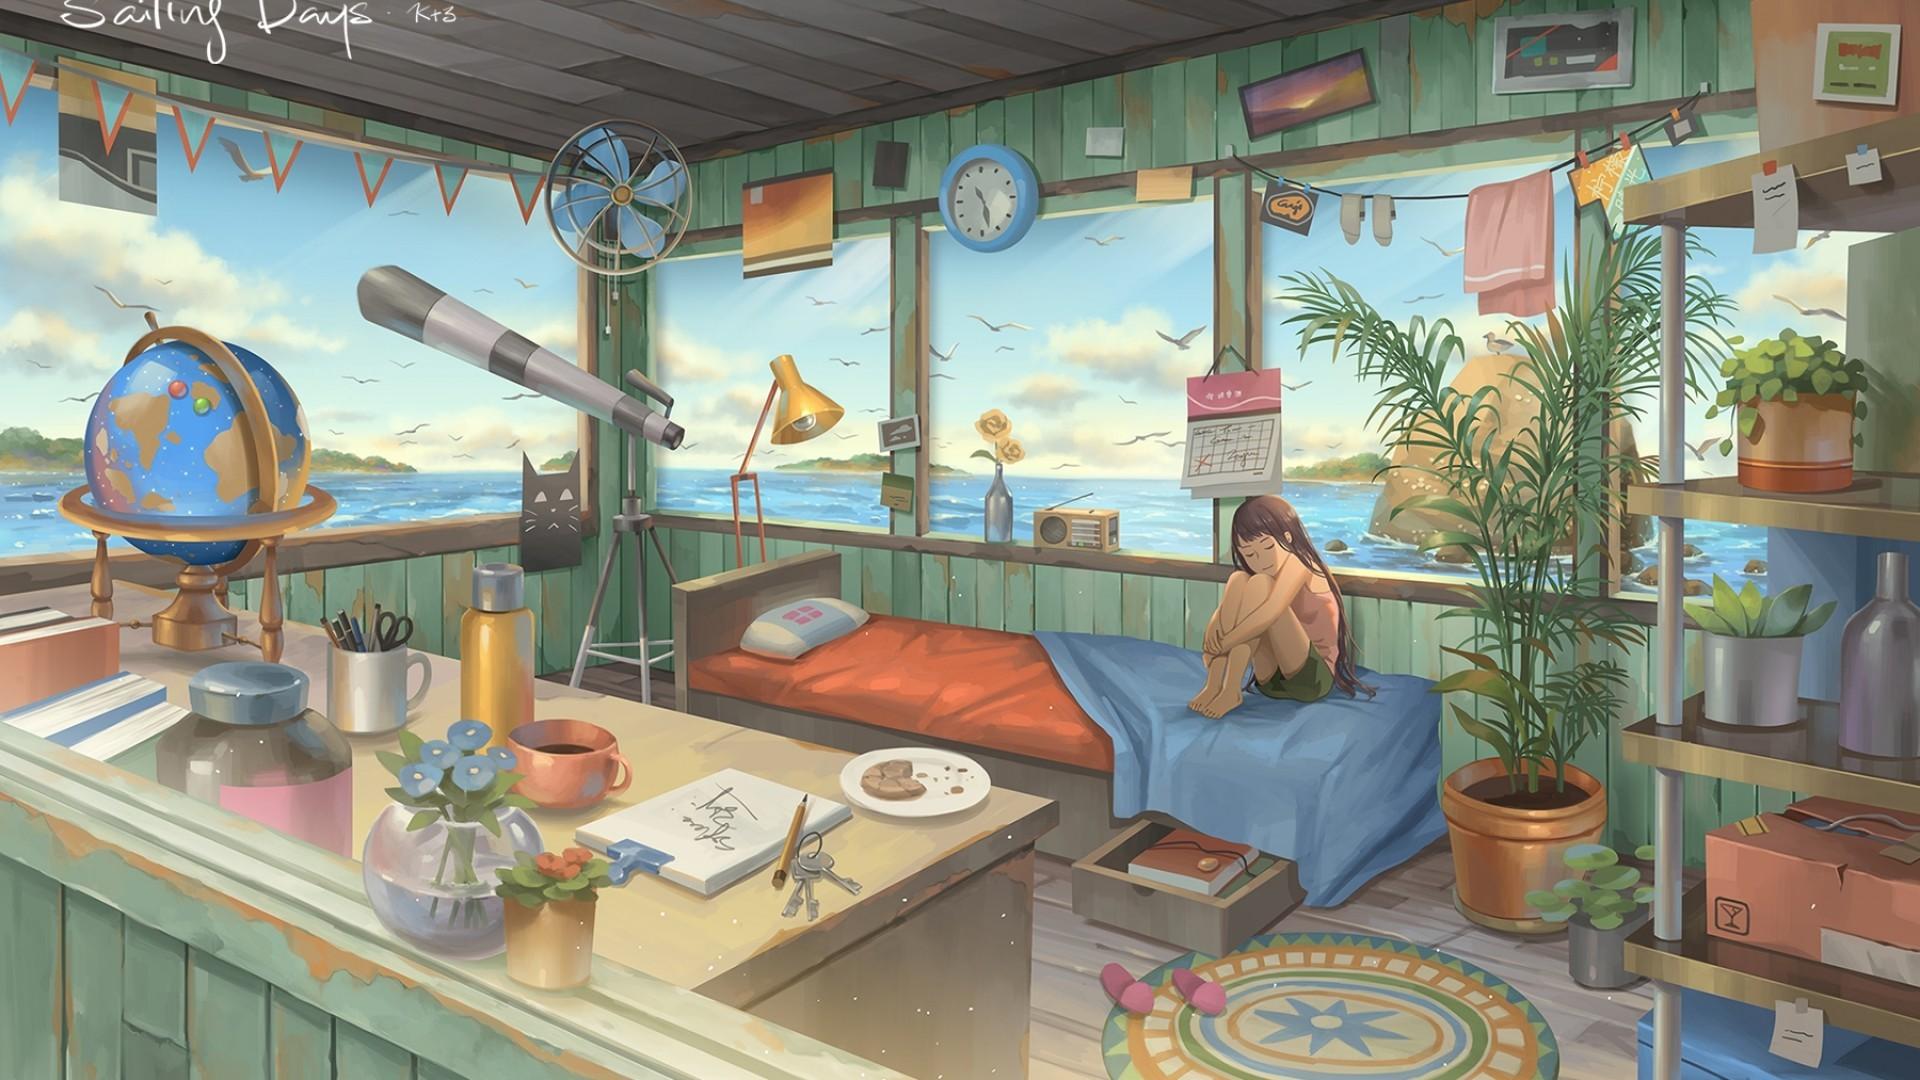 Download 1920x1080 Room, Ocean, Relax, Anime Girl, Sailing